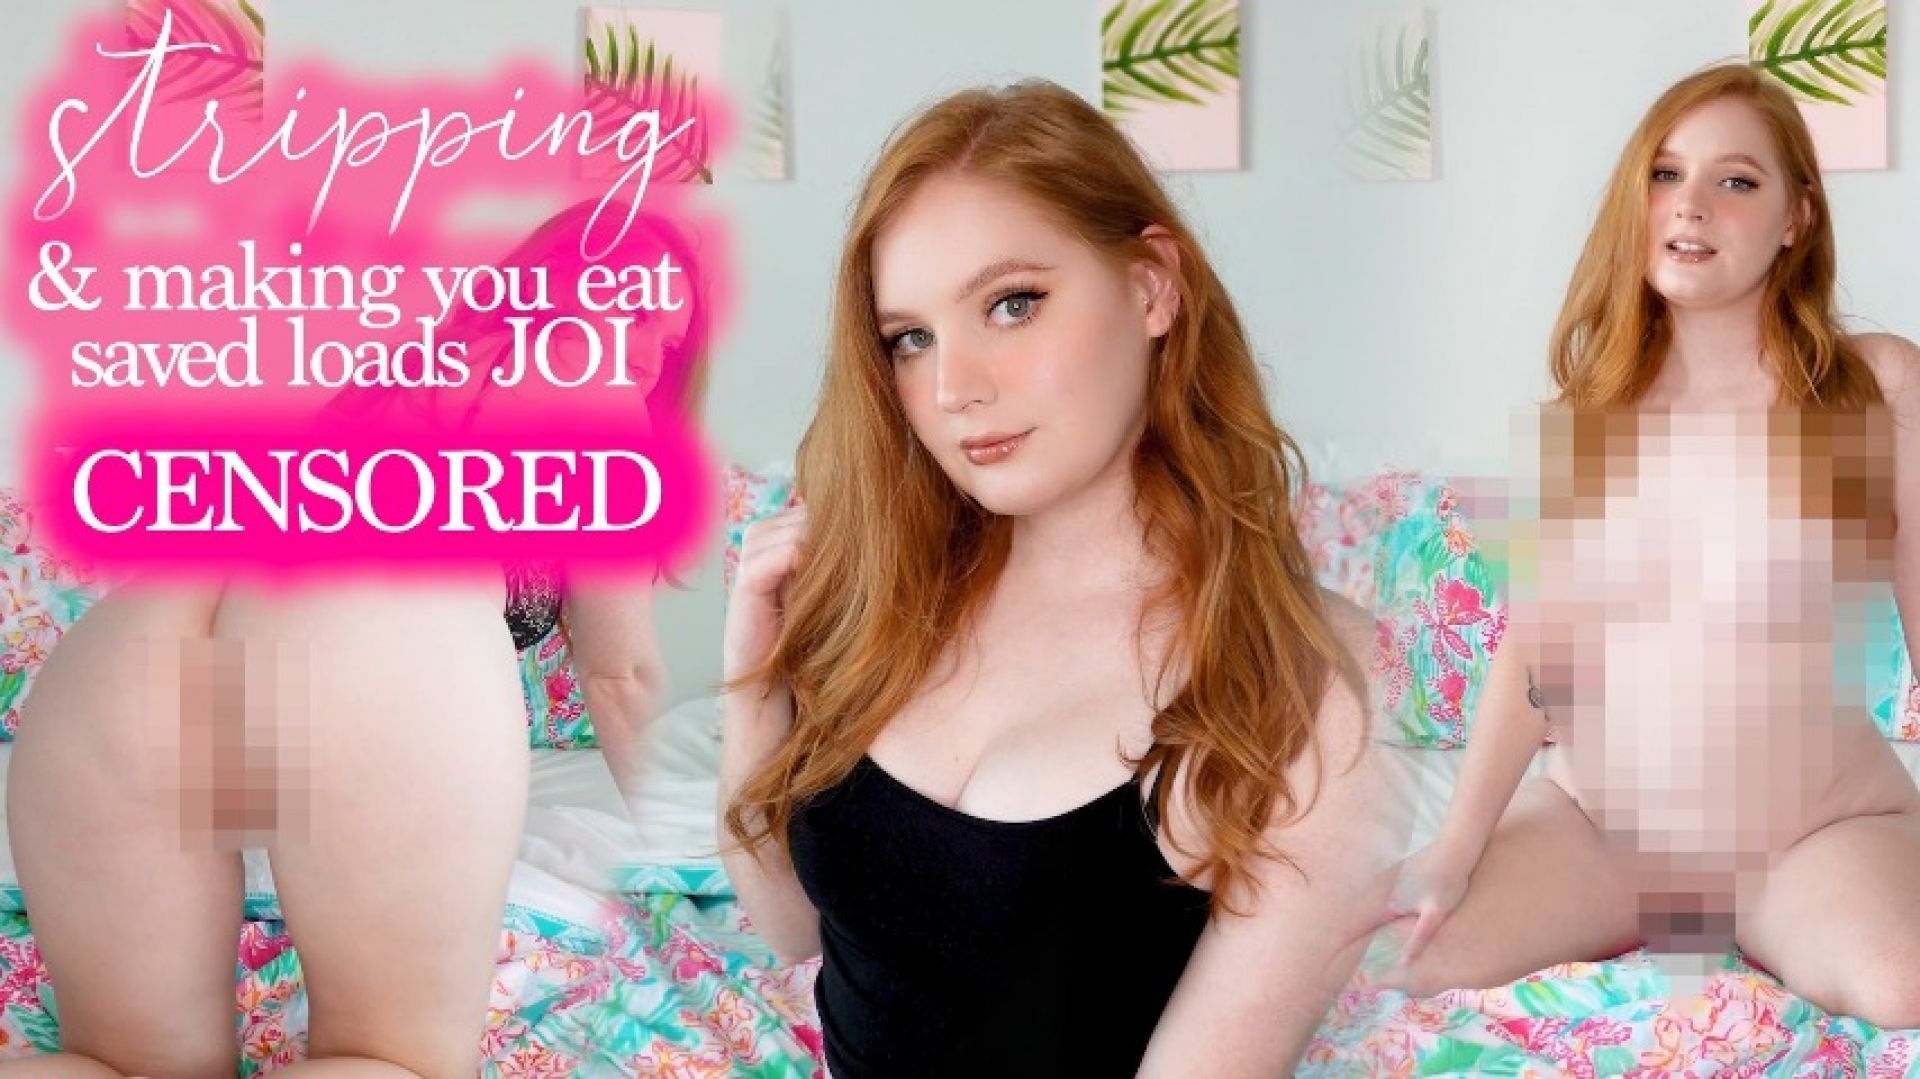 Stripping &amp; Making You Eat Saved Loads JOI CENSORED